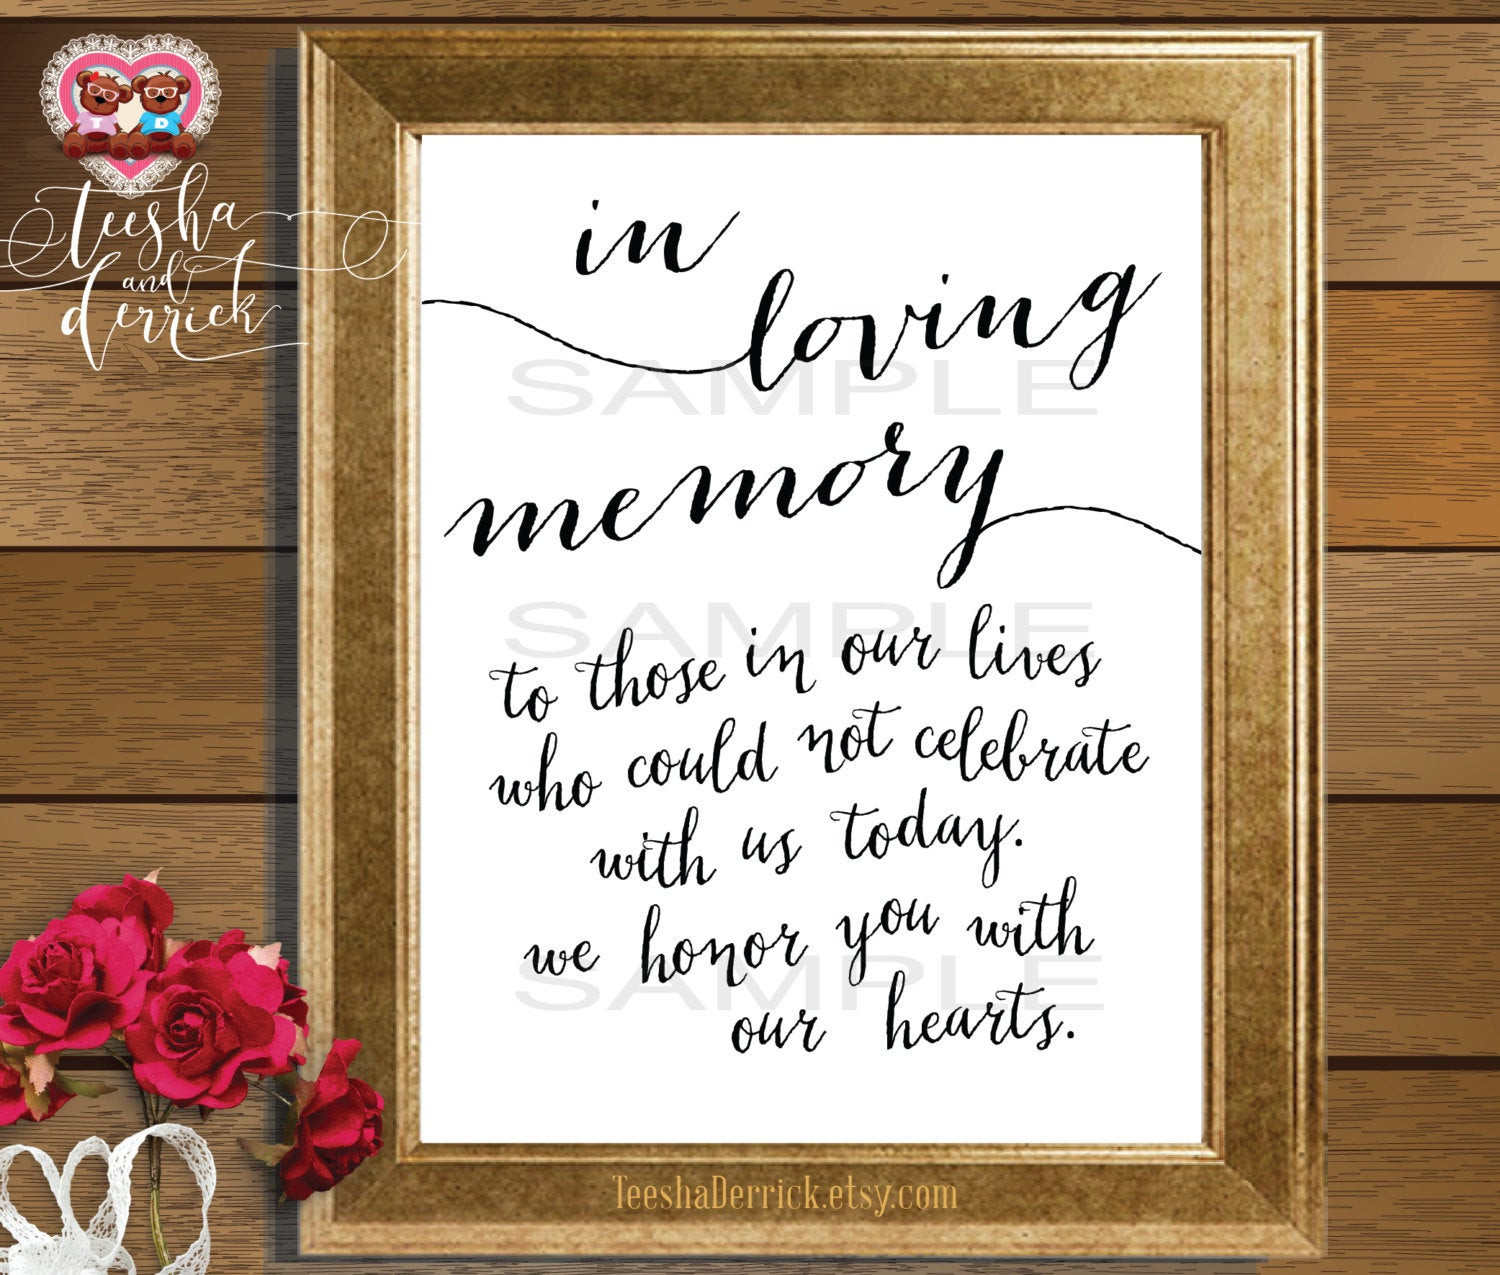 Memorial Day Quotes For Loved Ones
 Instant Printable In Loving Memory Wedding Memorial